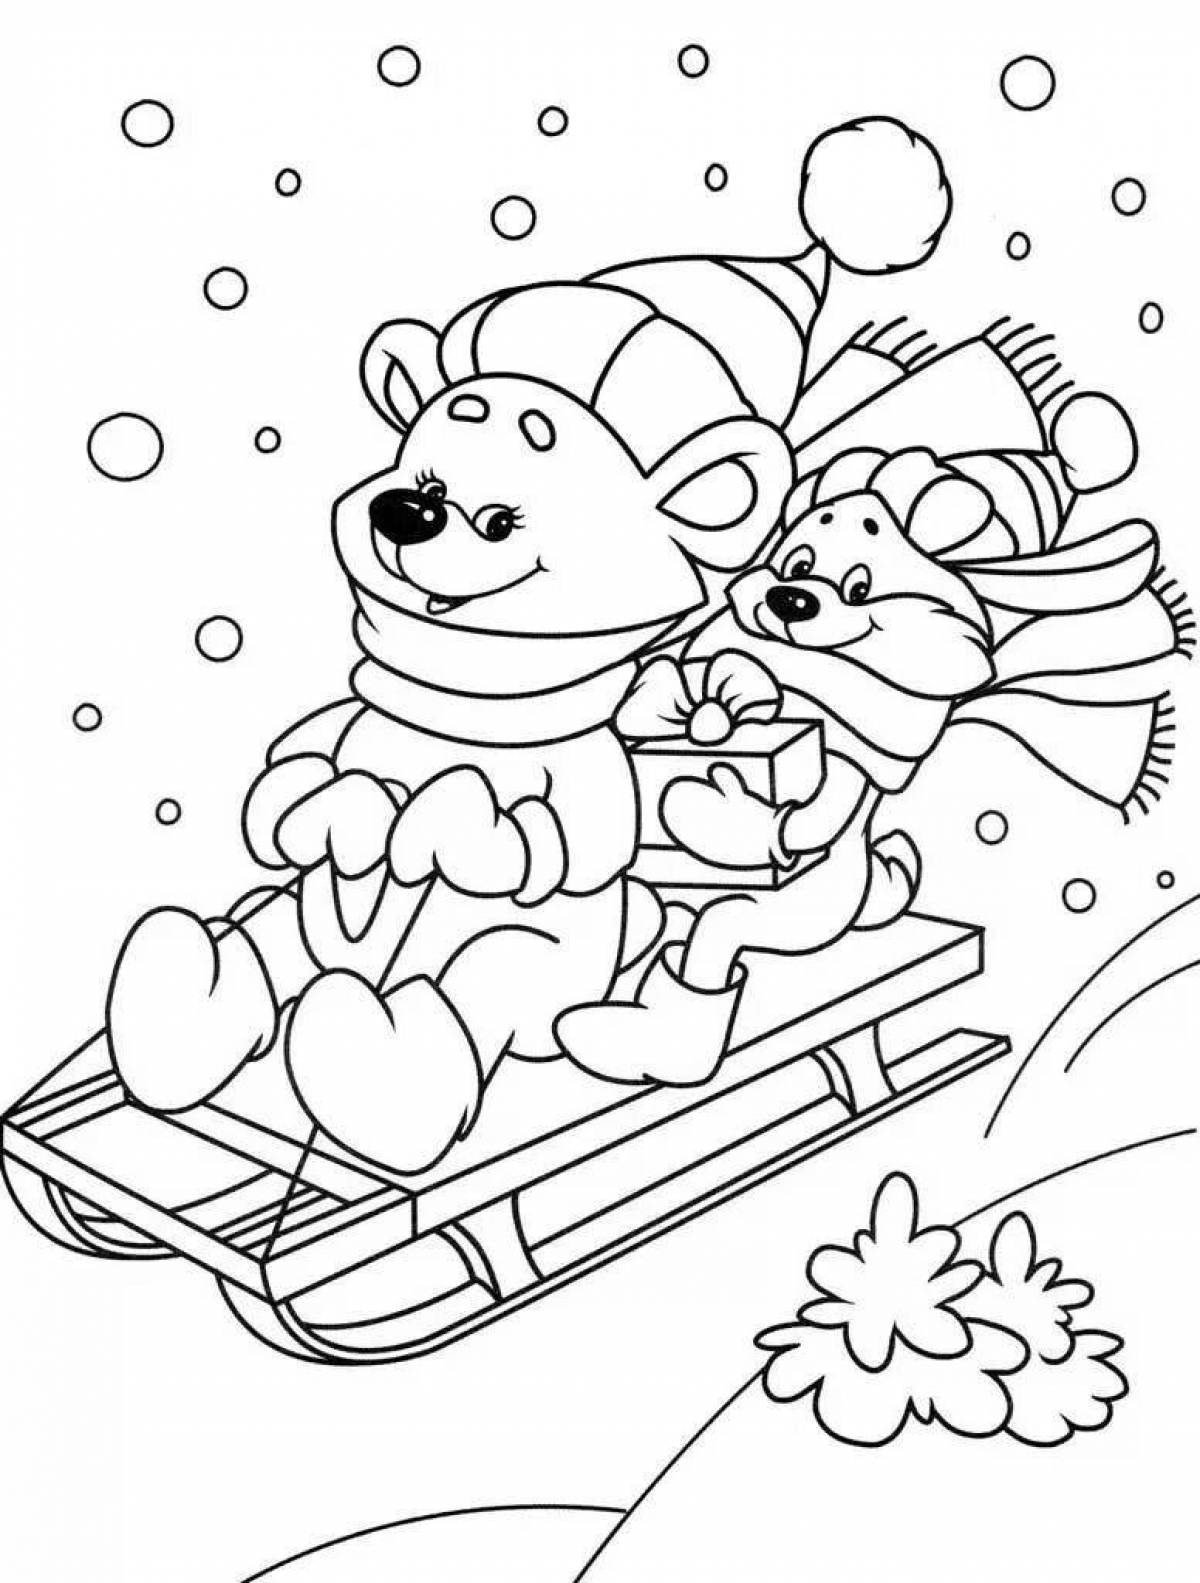 Fun coloring book for children 2-3 years old for kindergarten winter